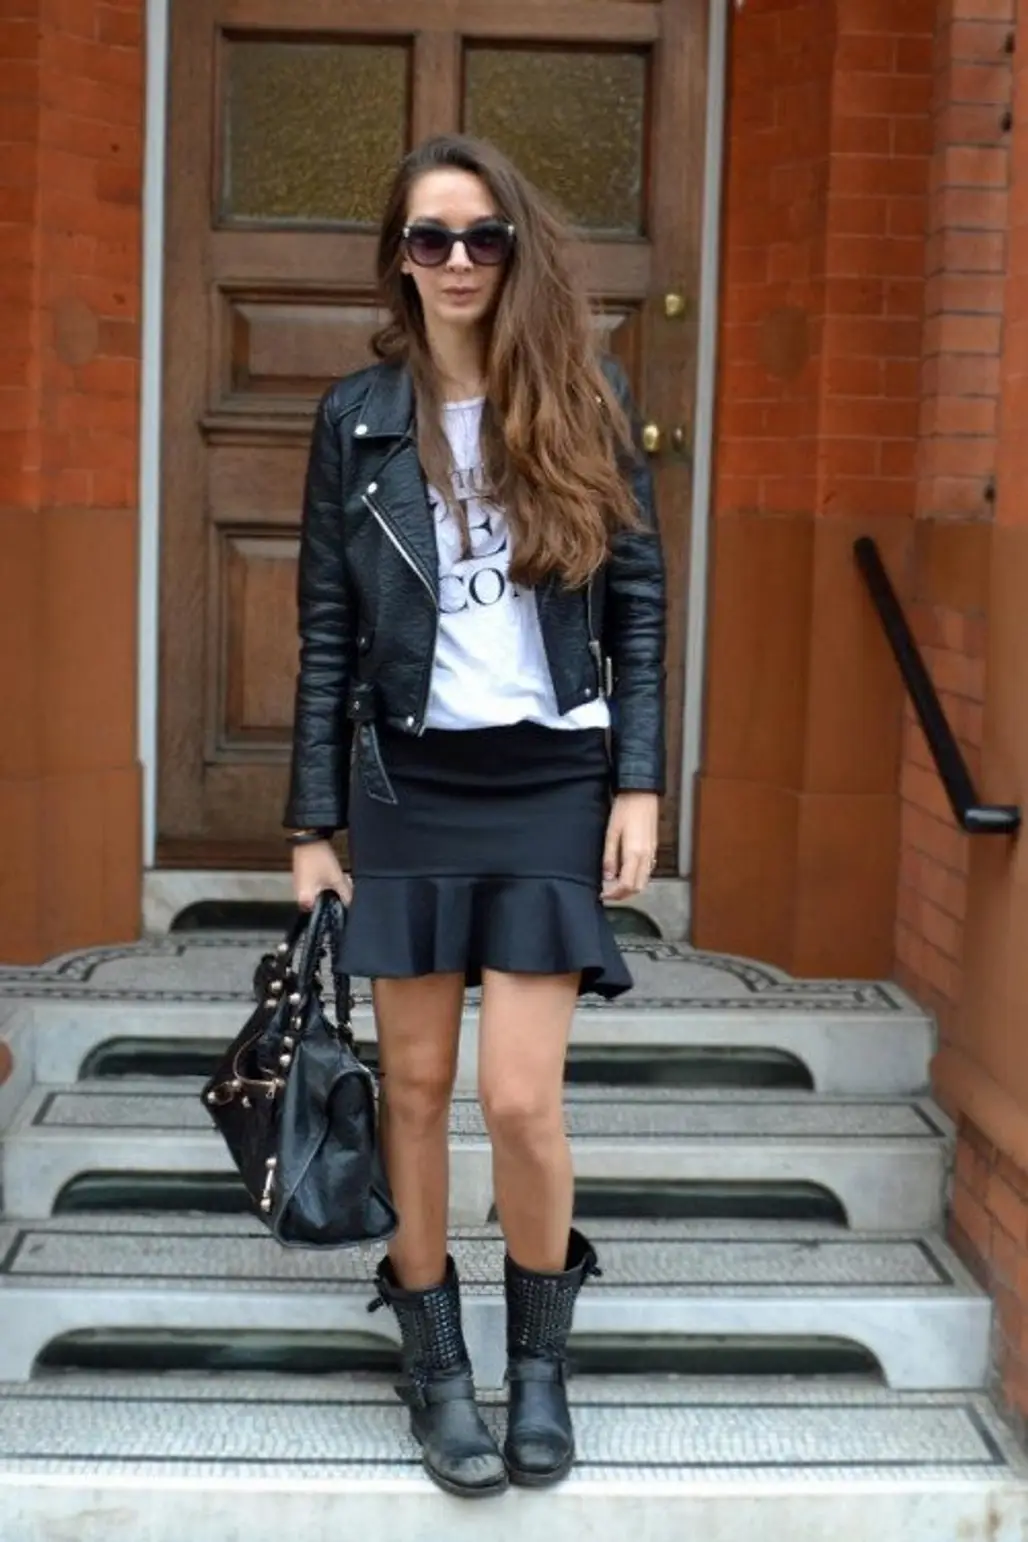 Pair a Ruffled Skirt with a Leather Jacket